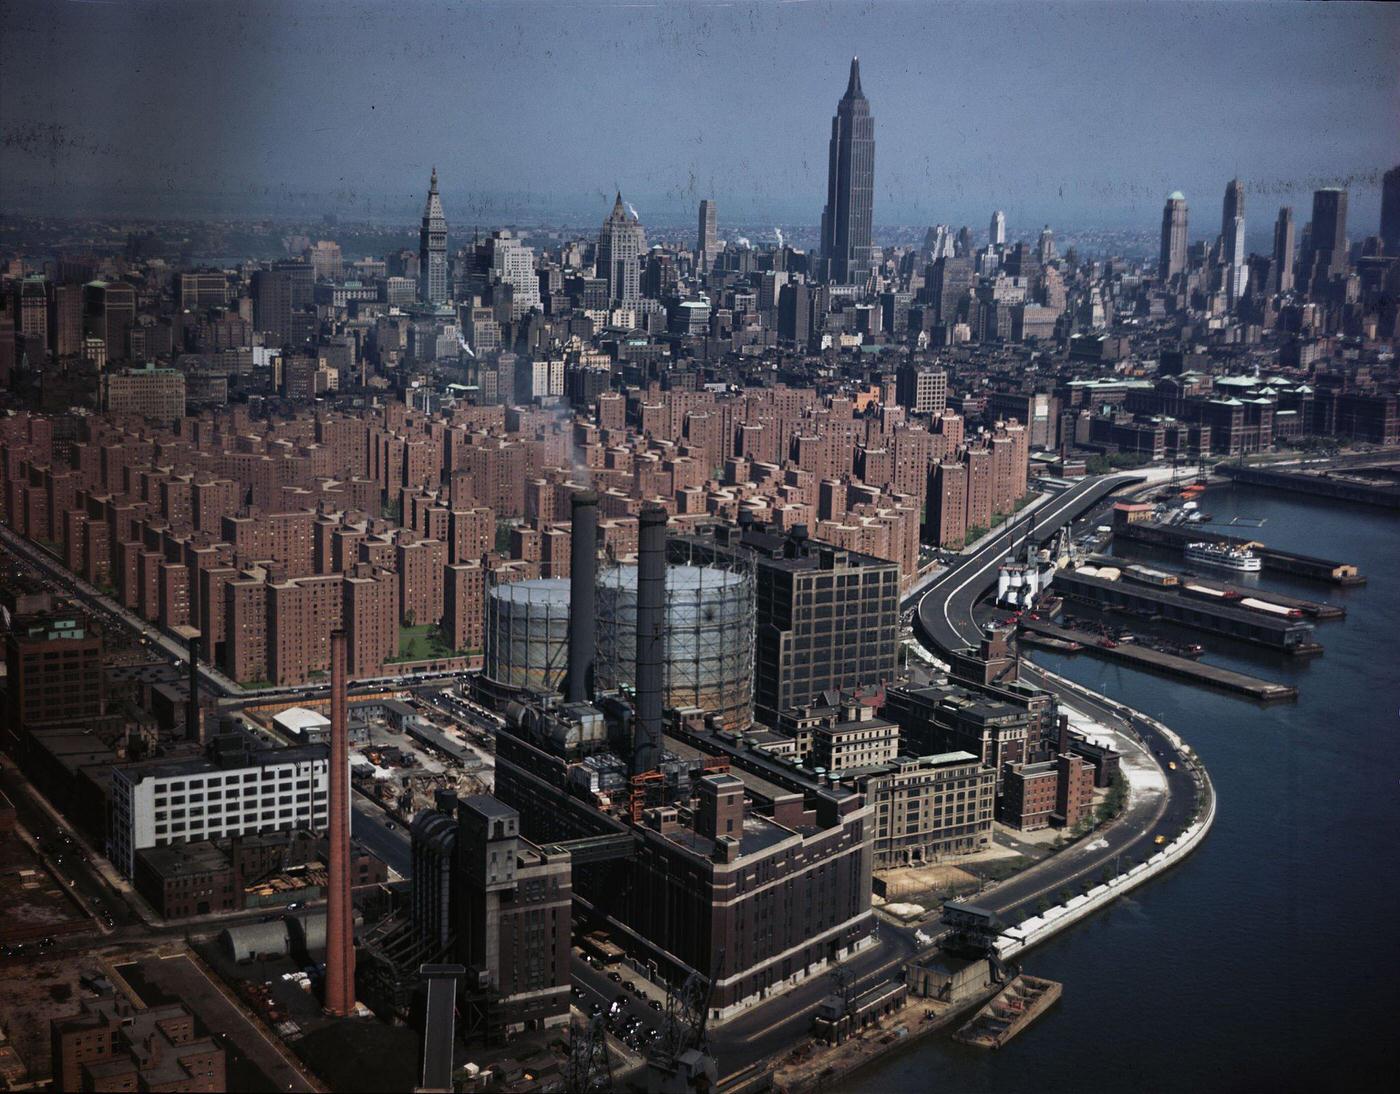 Aerial View Of Cooper Village And Stuyvesant Town, Tenement Housing Projects, Empire State Building In Background, Manhattan, 1951.